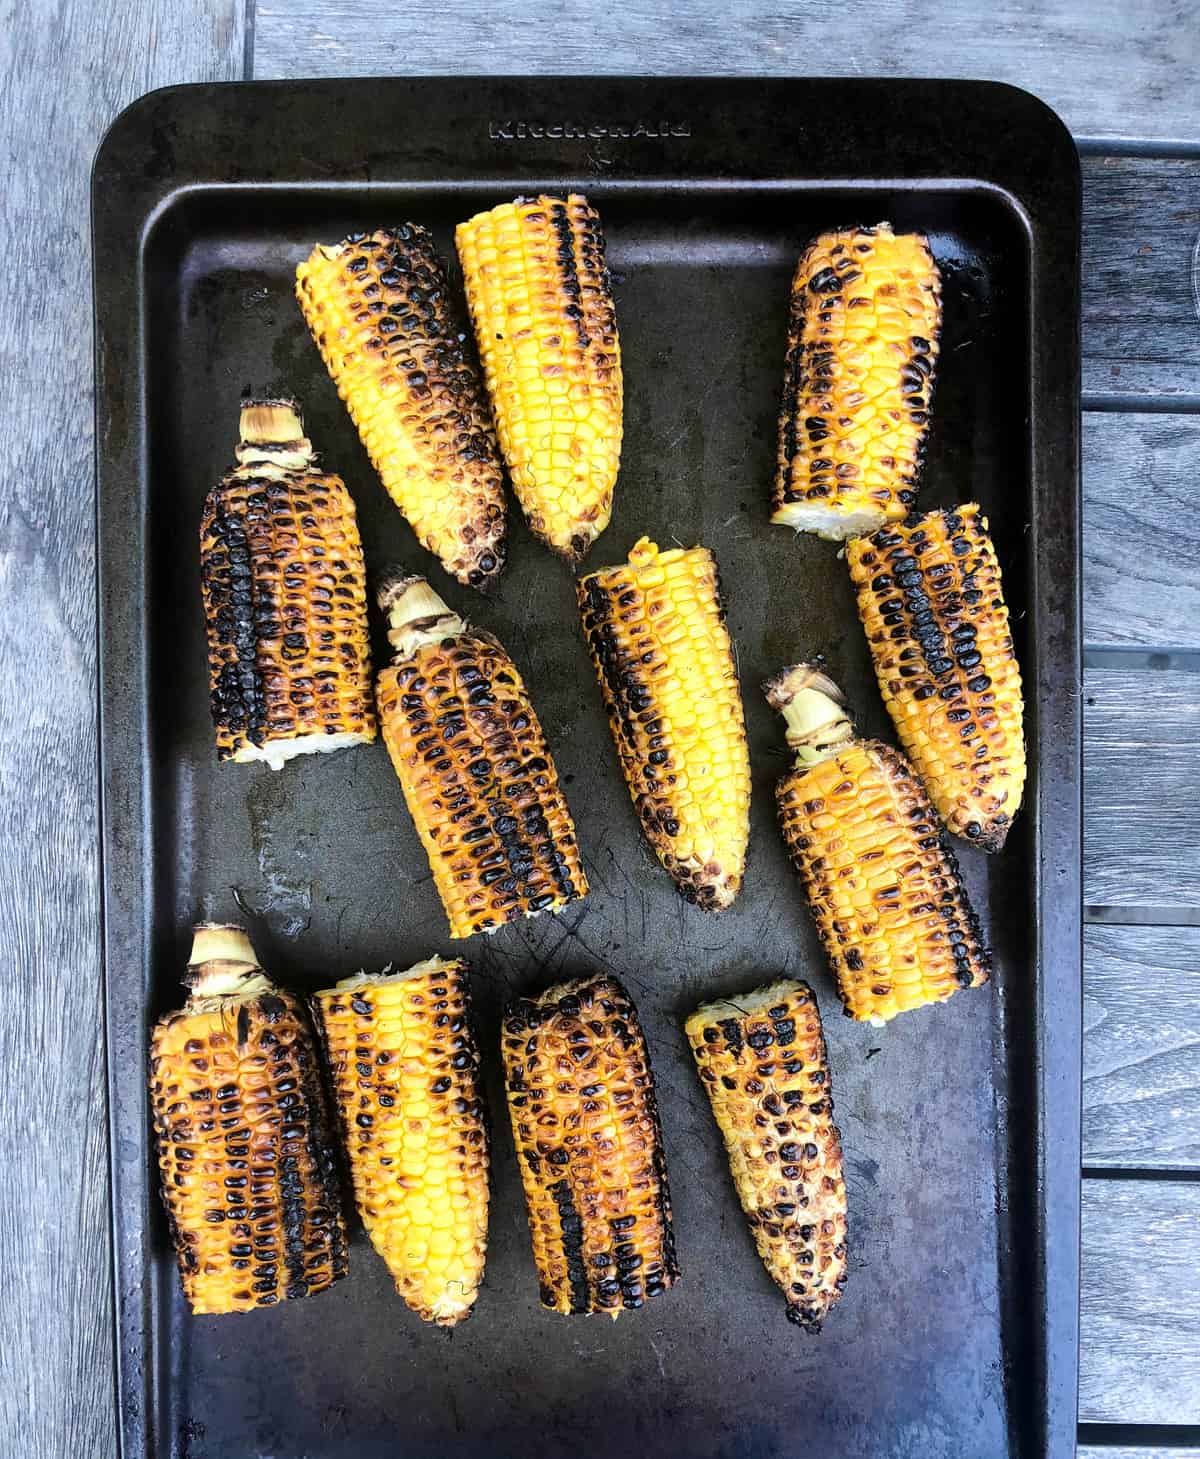 Grill the shucked corn and cut in half.